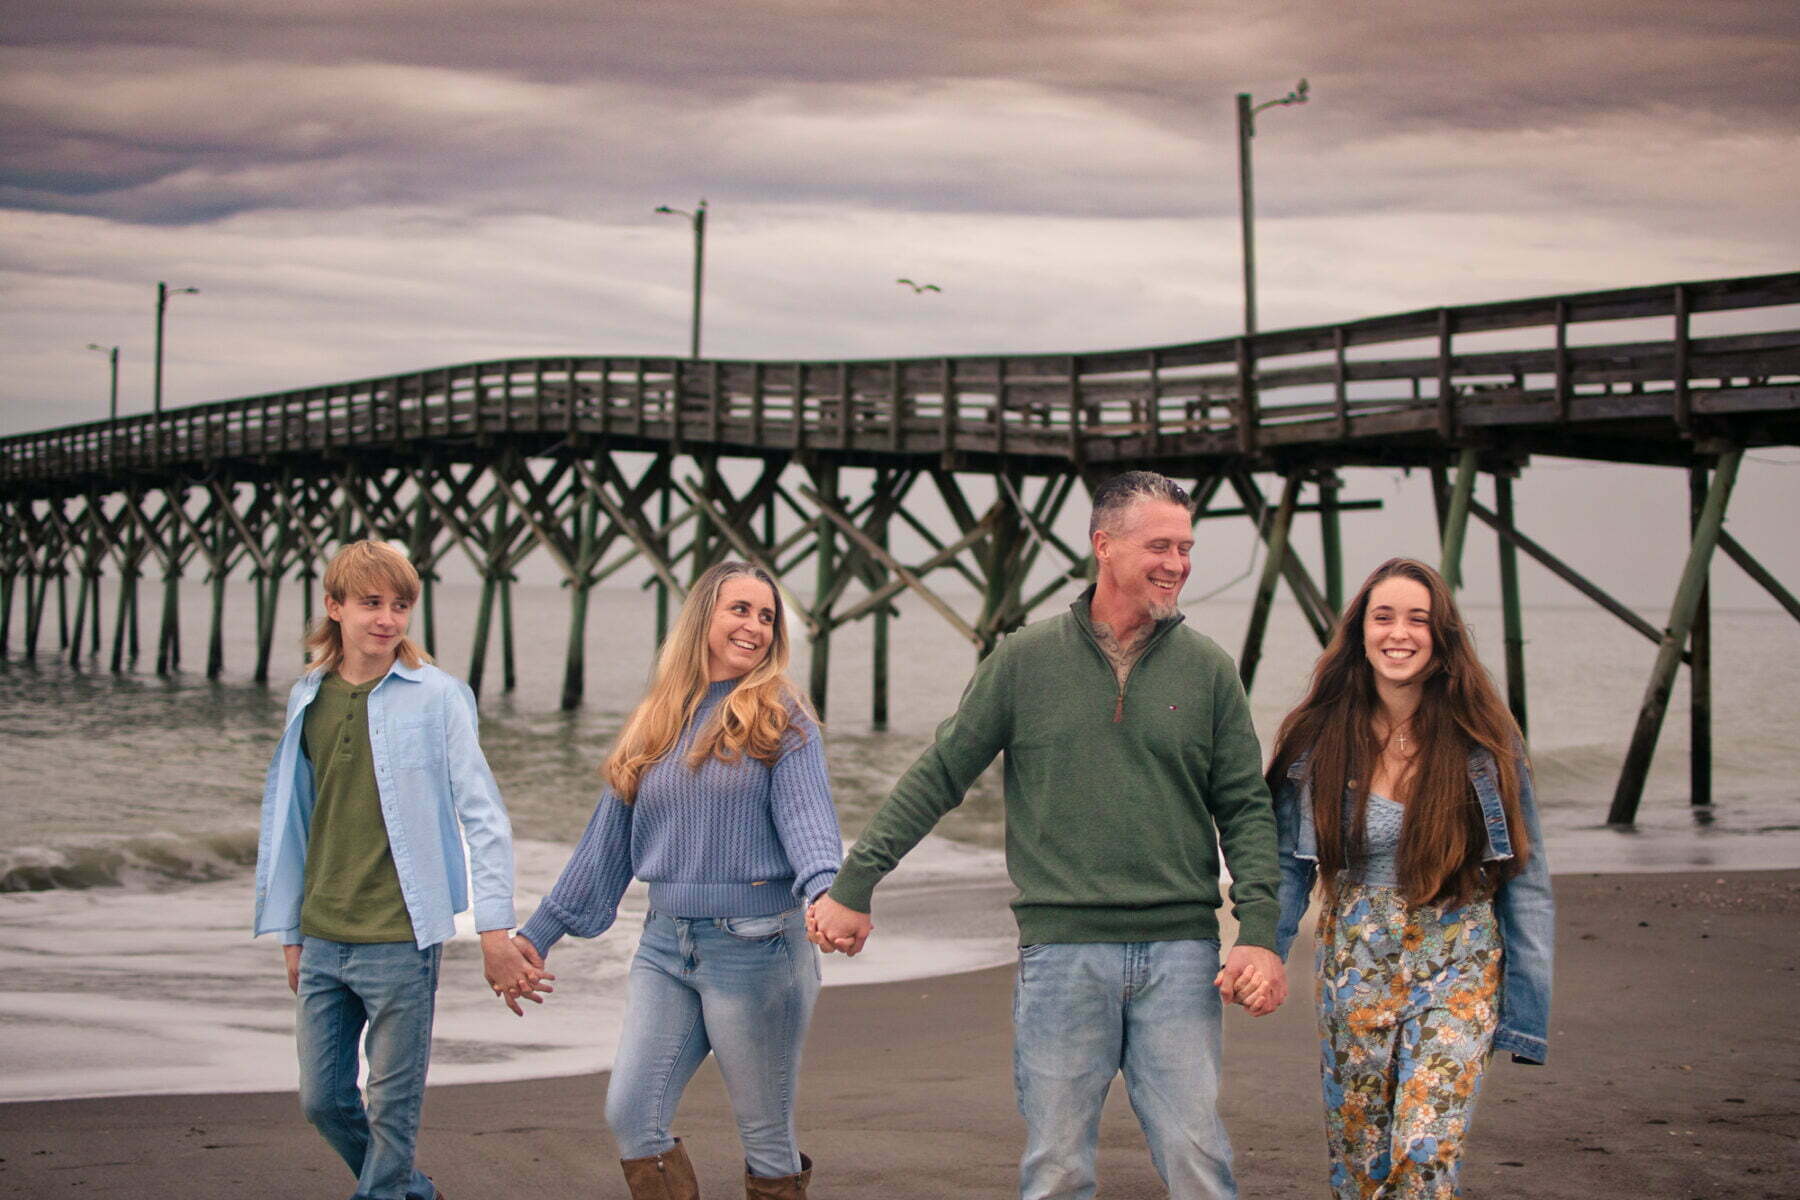 Candid family portrait photography session at Holden Beach Pier, NC.